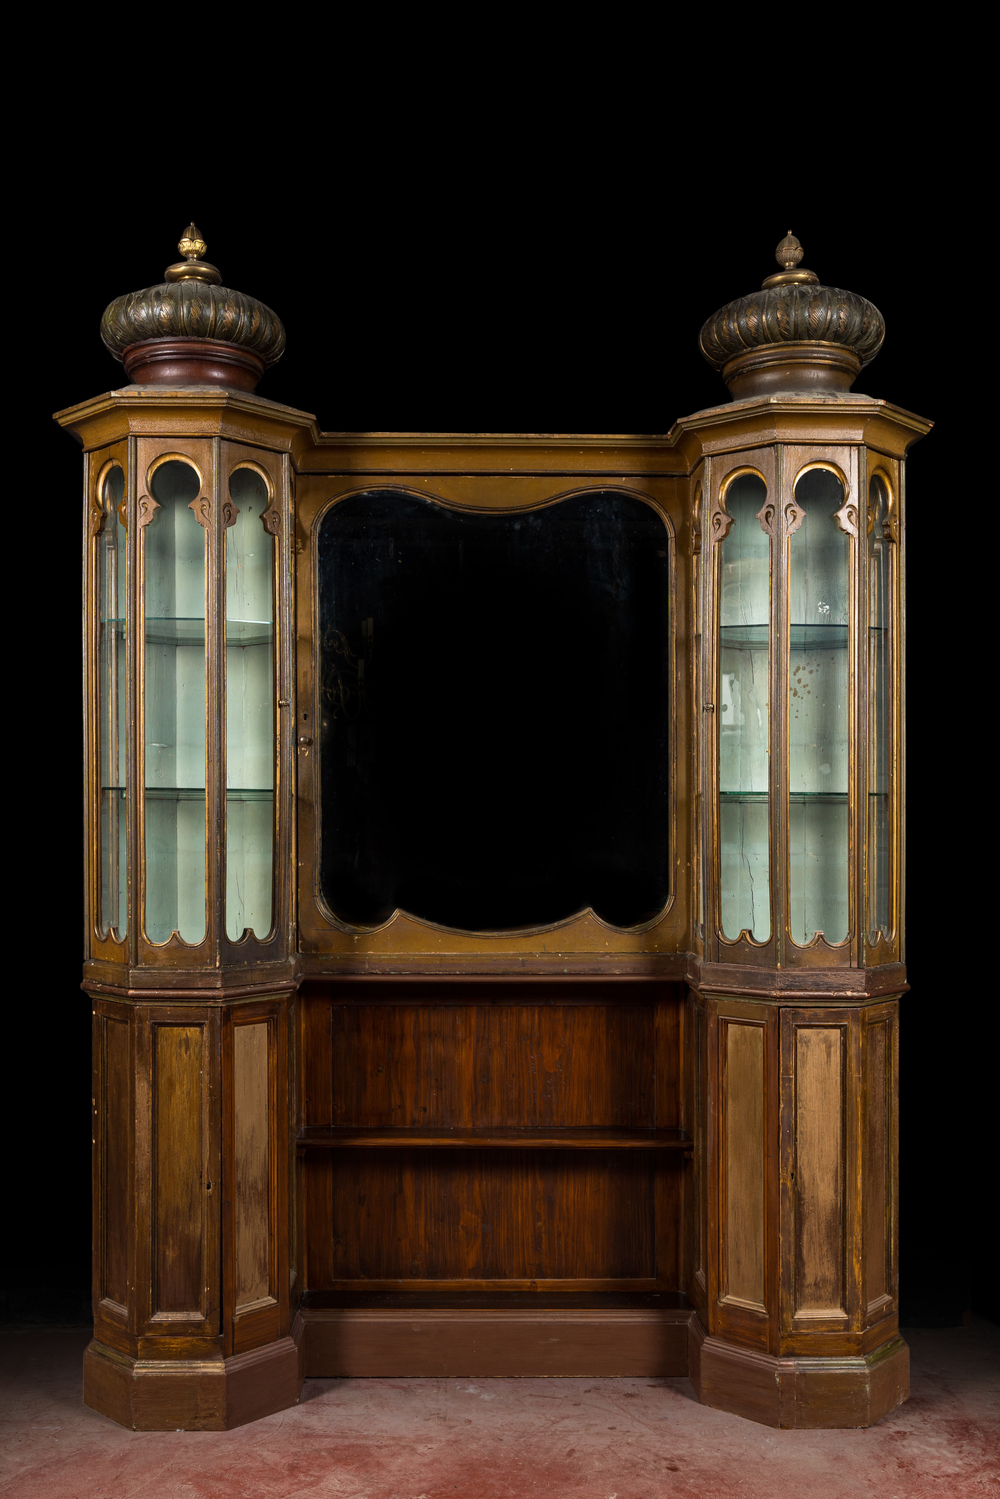 A polychromed and gilt pine wood display case in Moorish style, probably England, 19th C.